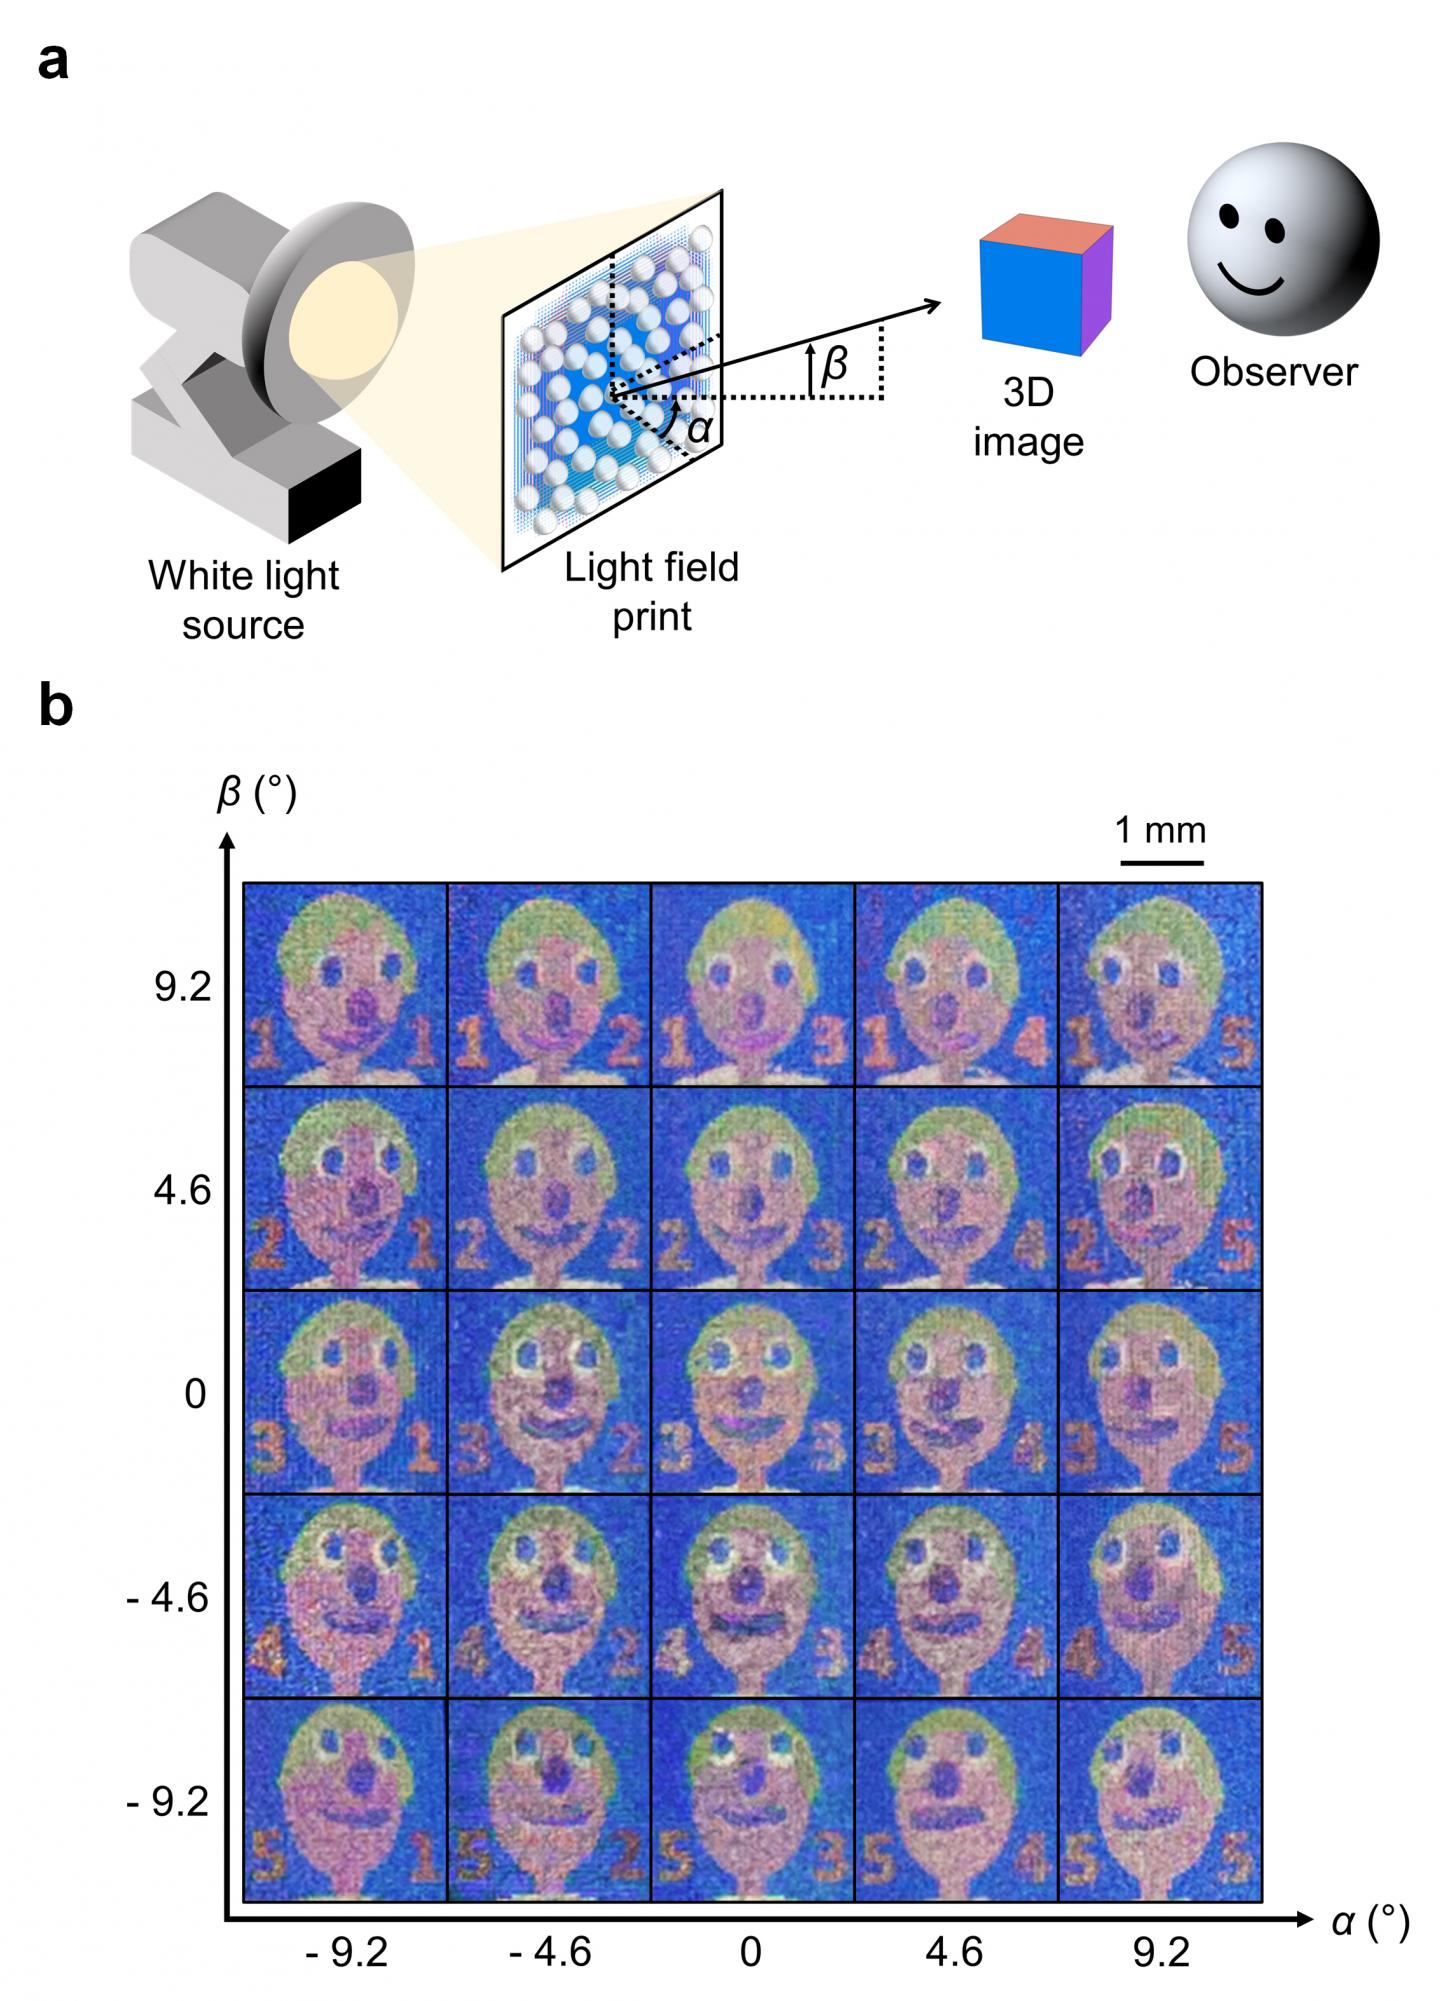 (a) Schematic of how a light field print works. (b) The light field print observed from different angles.